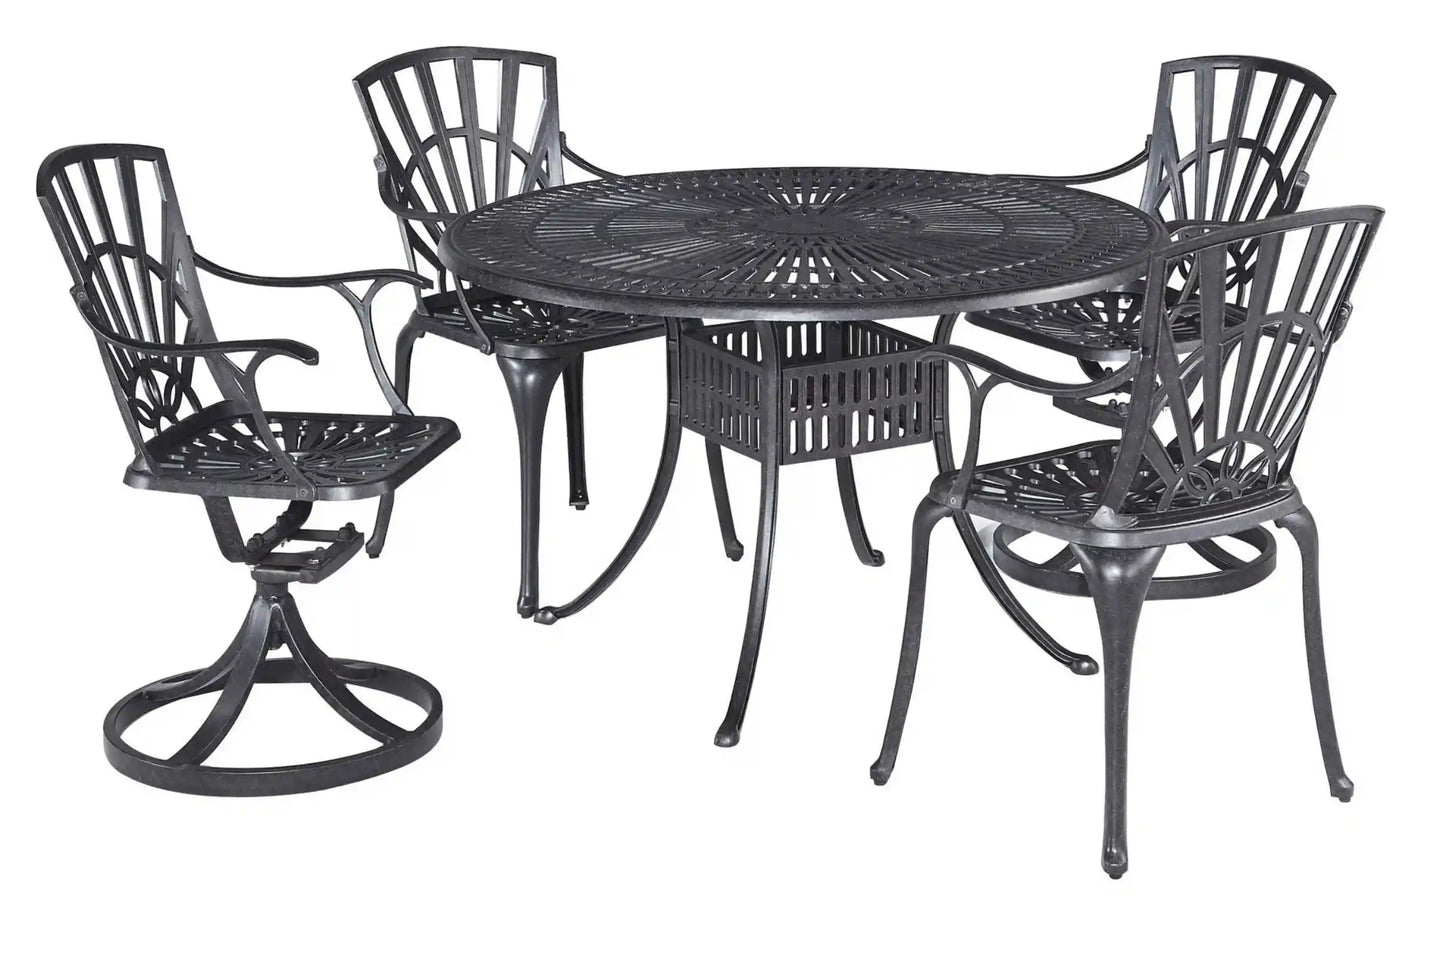 Homestyles Grenada Charcoal 5 Piece Outdoor Dining Set